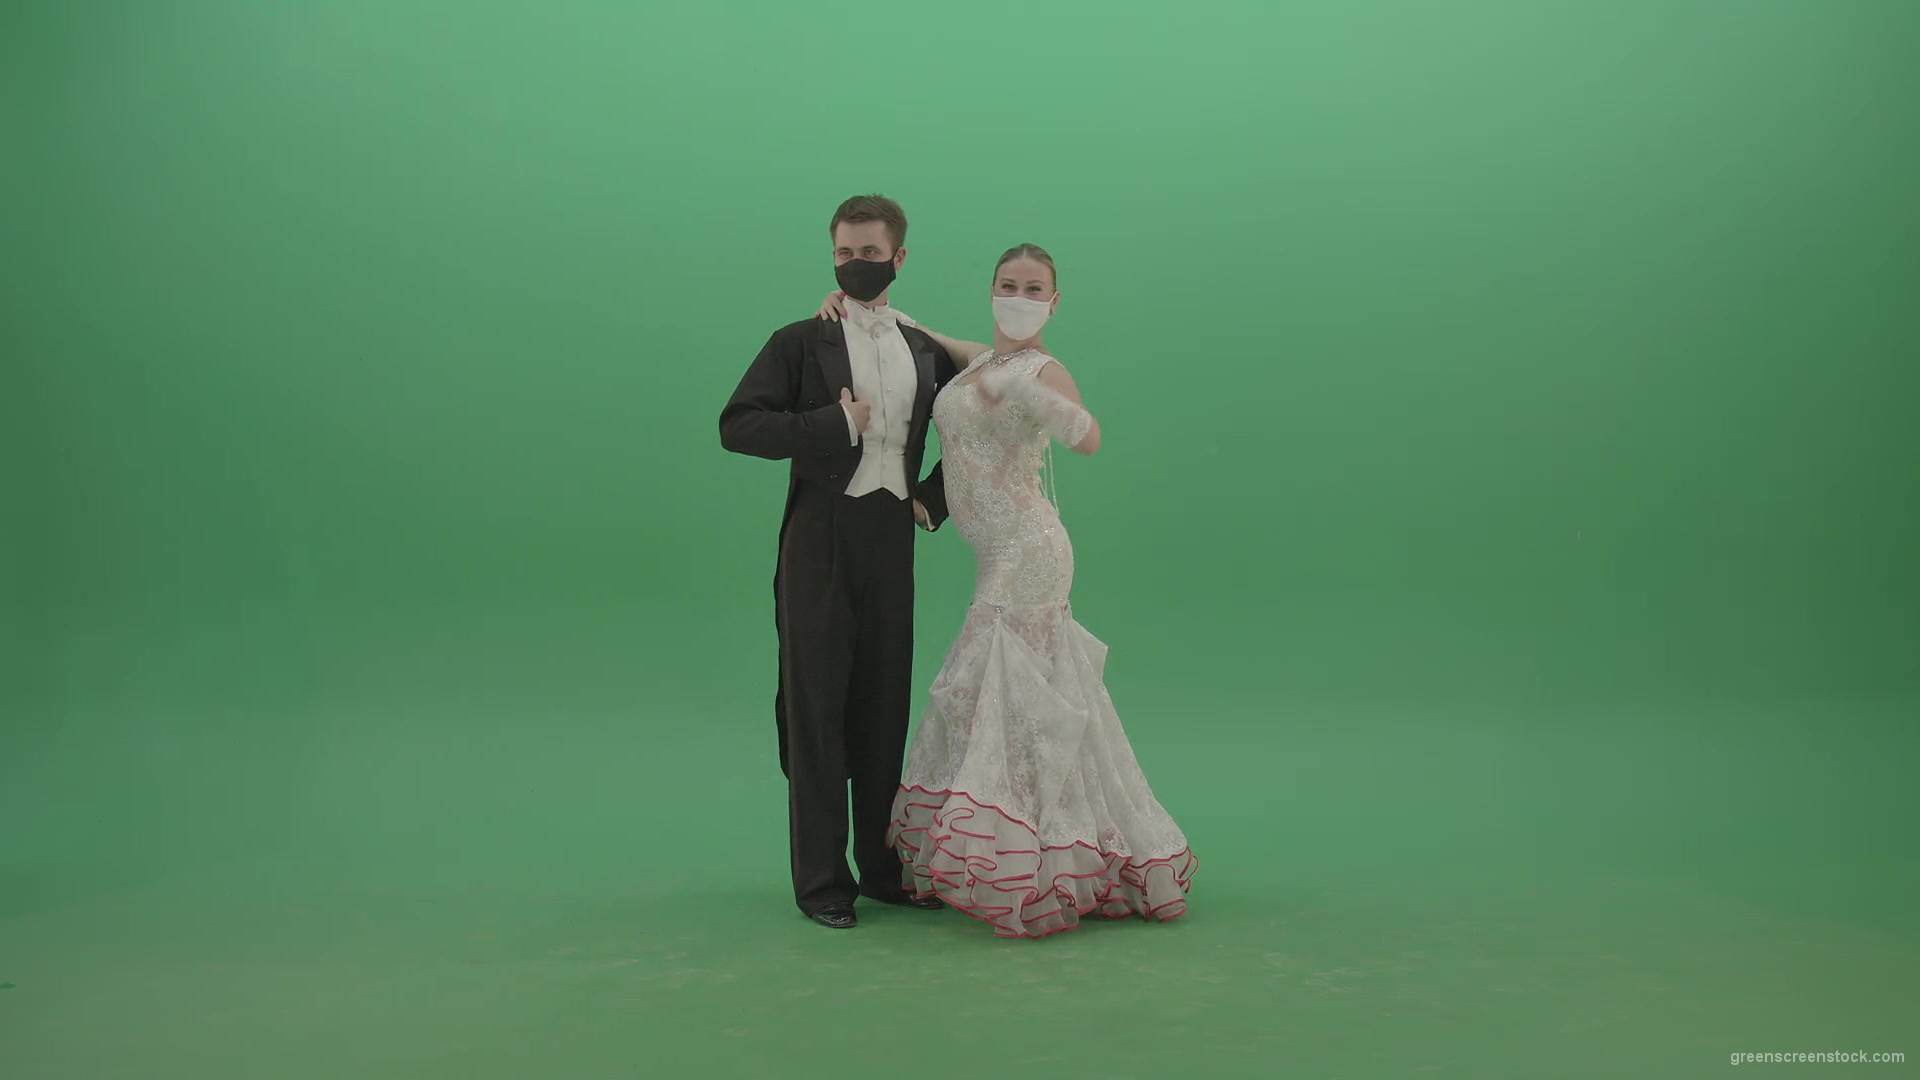 Funny-happy-balleroom-dancers-couple-chilling-and-laughing-on-green-screen-4K-Video-Footage-1920_006 Green Screen Stock